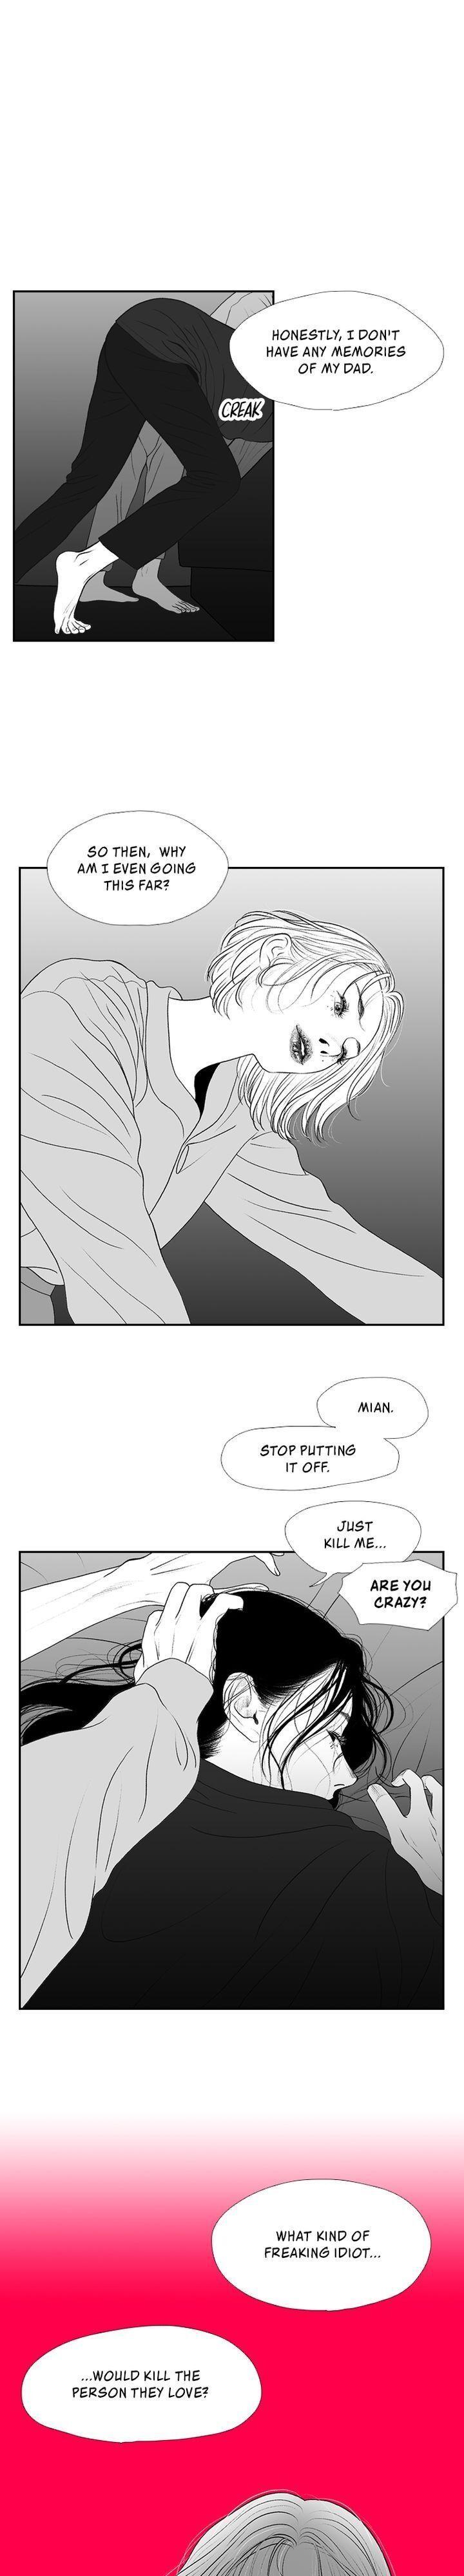 Kill Me Now - Page 2